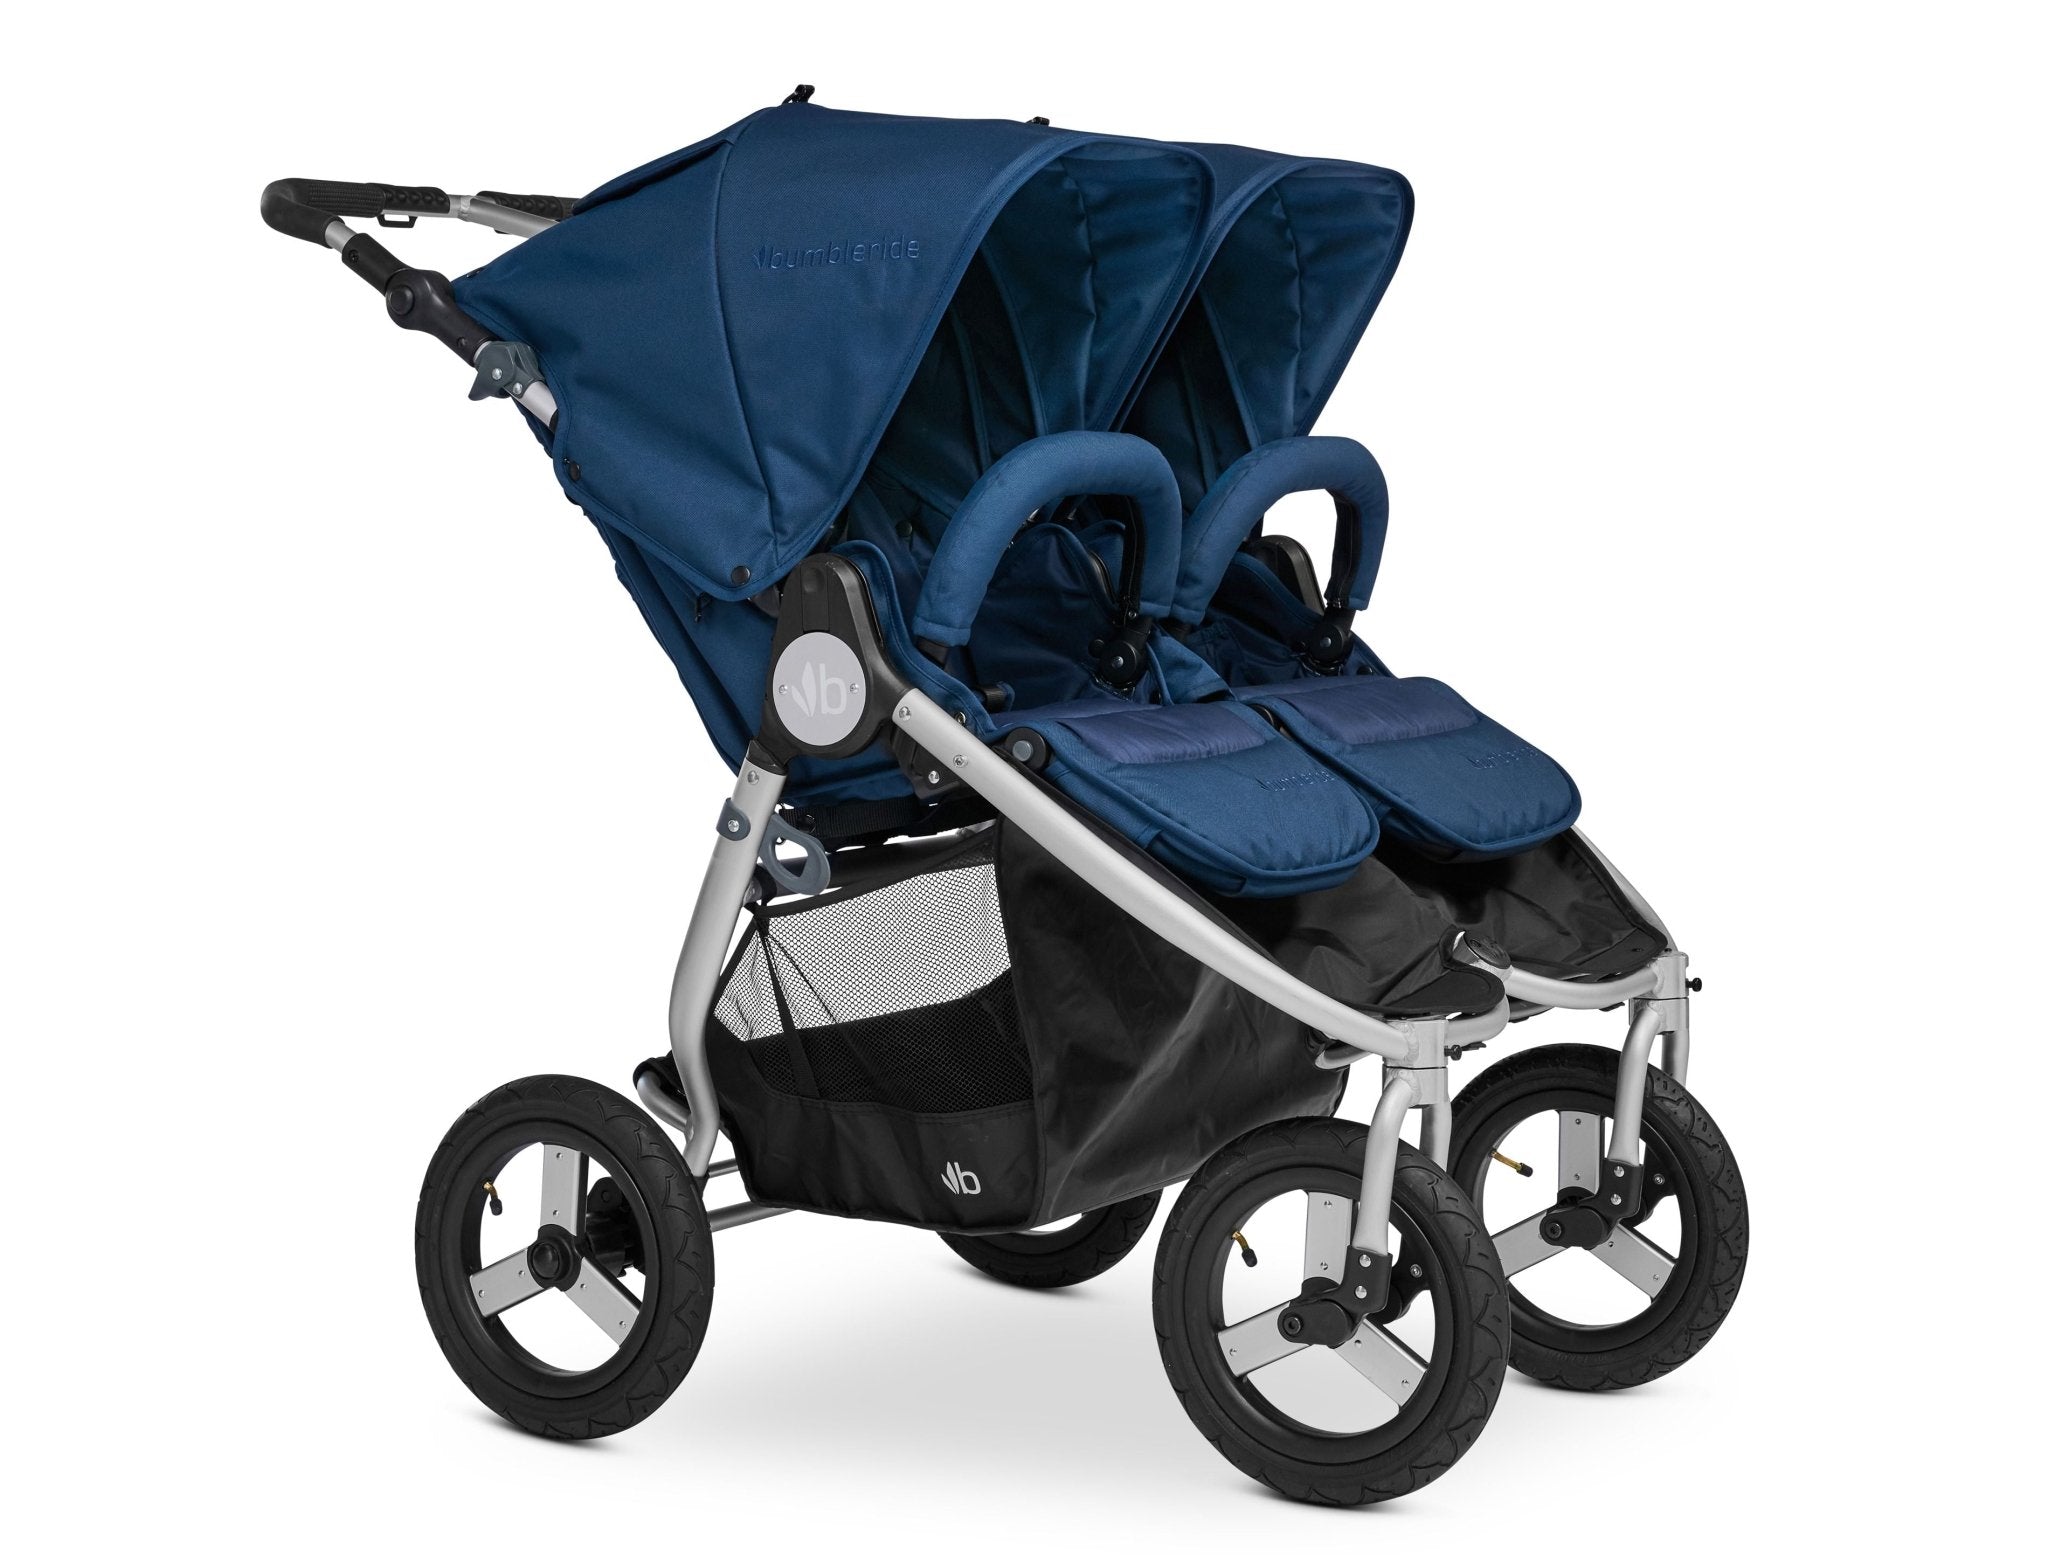 Bumbleride 2022 Indie Twin Double Jogging Stroller - ANB Baby -850038887179$500 - $1000